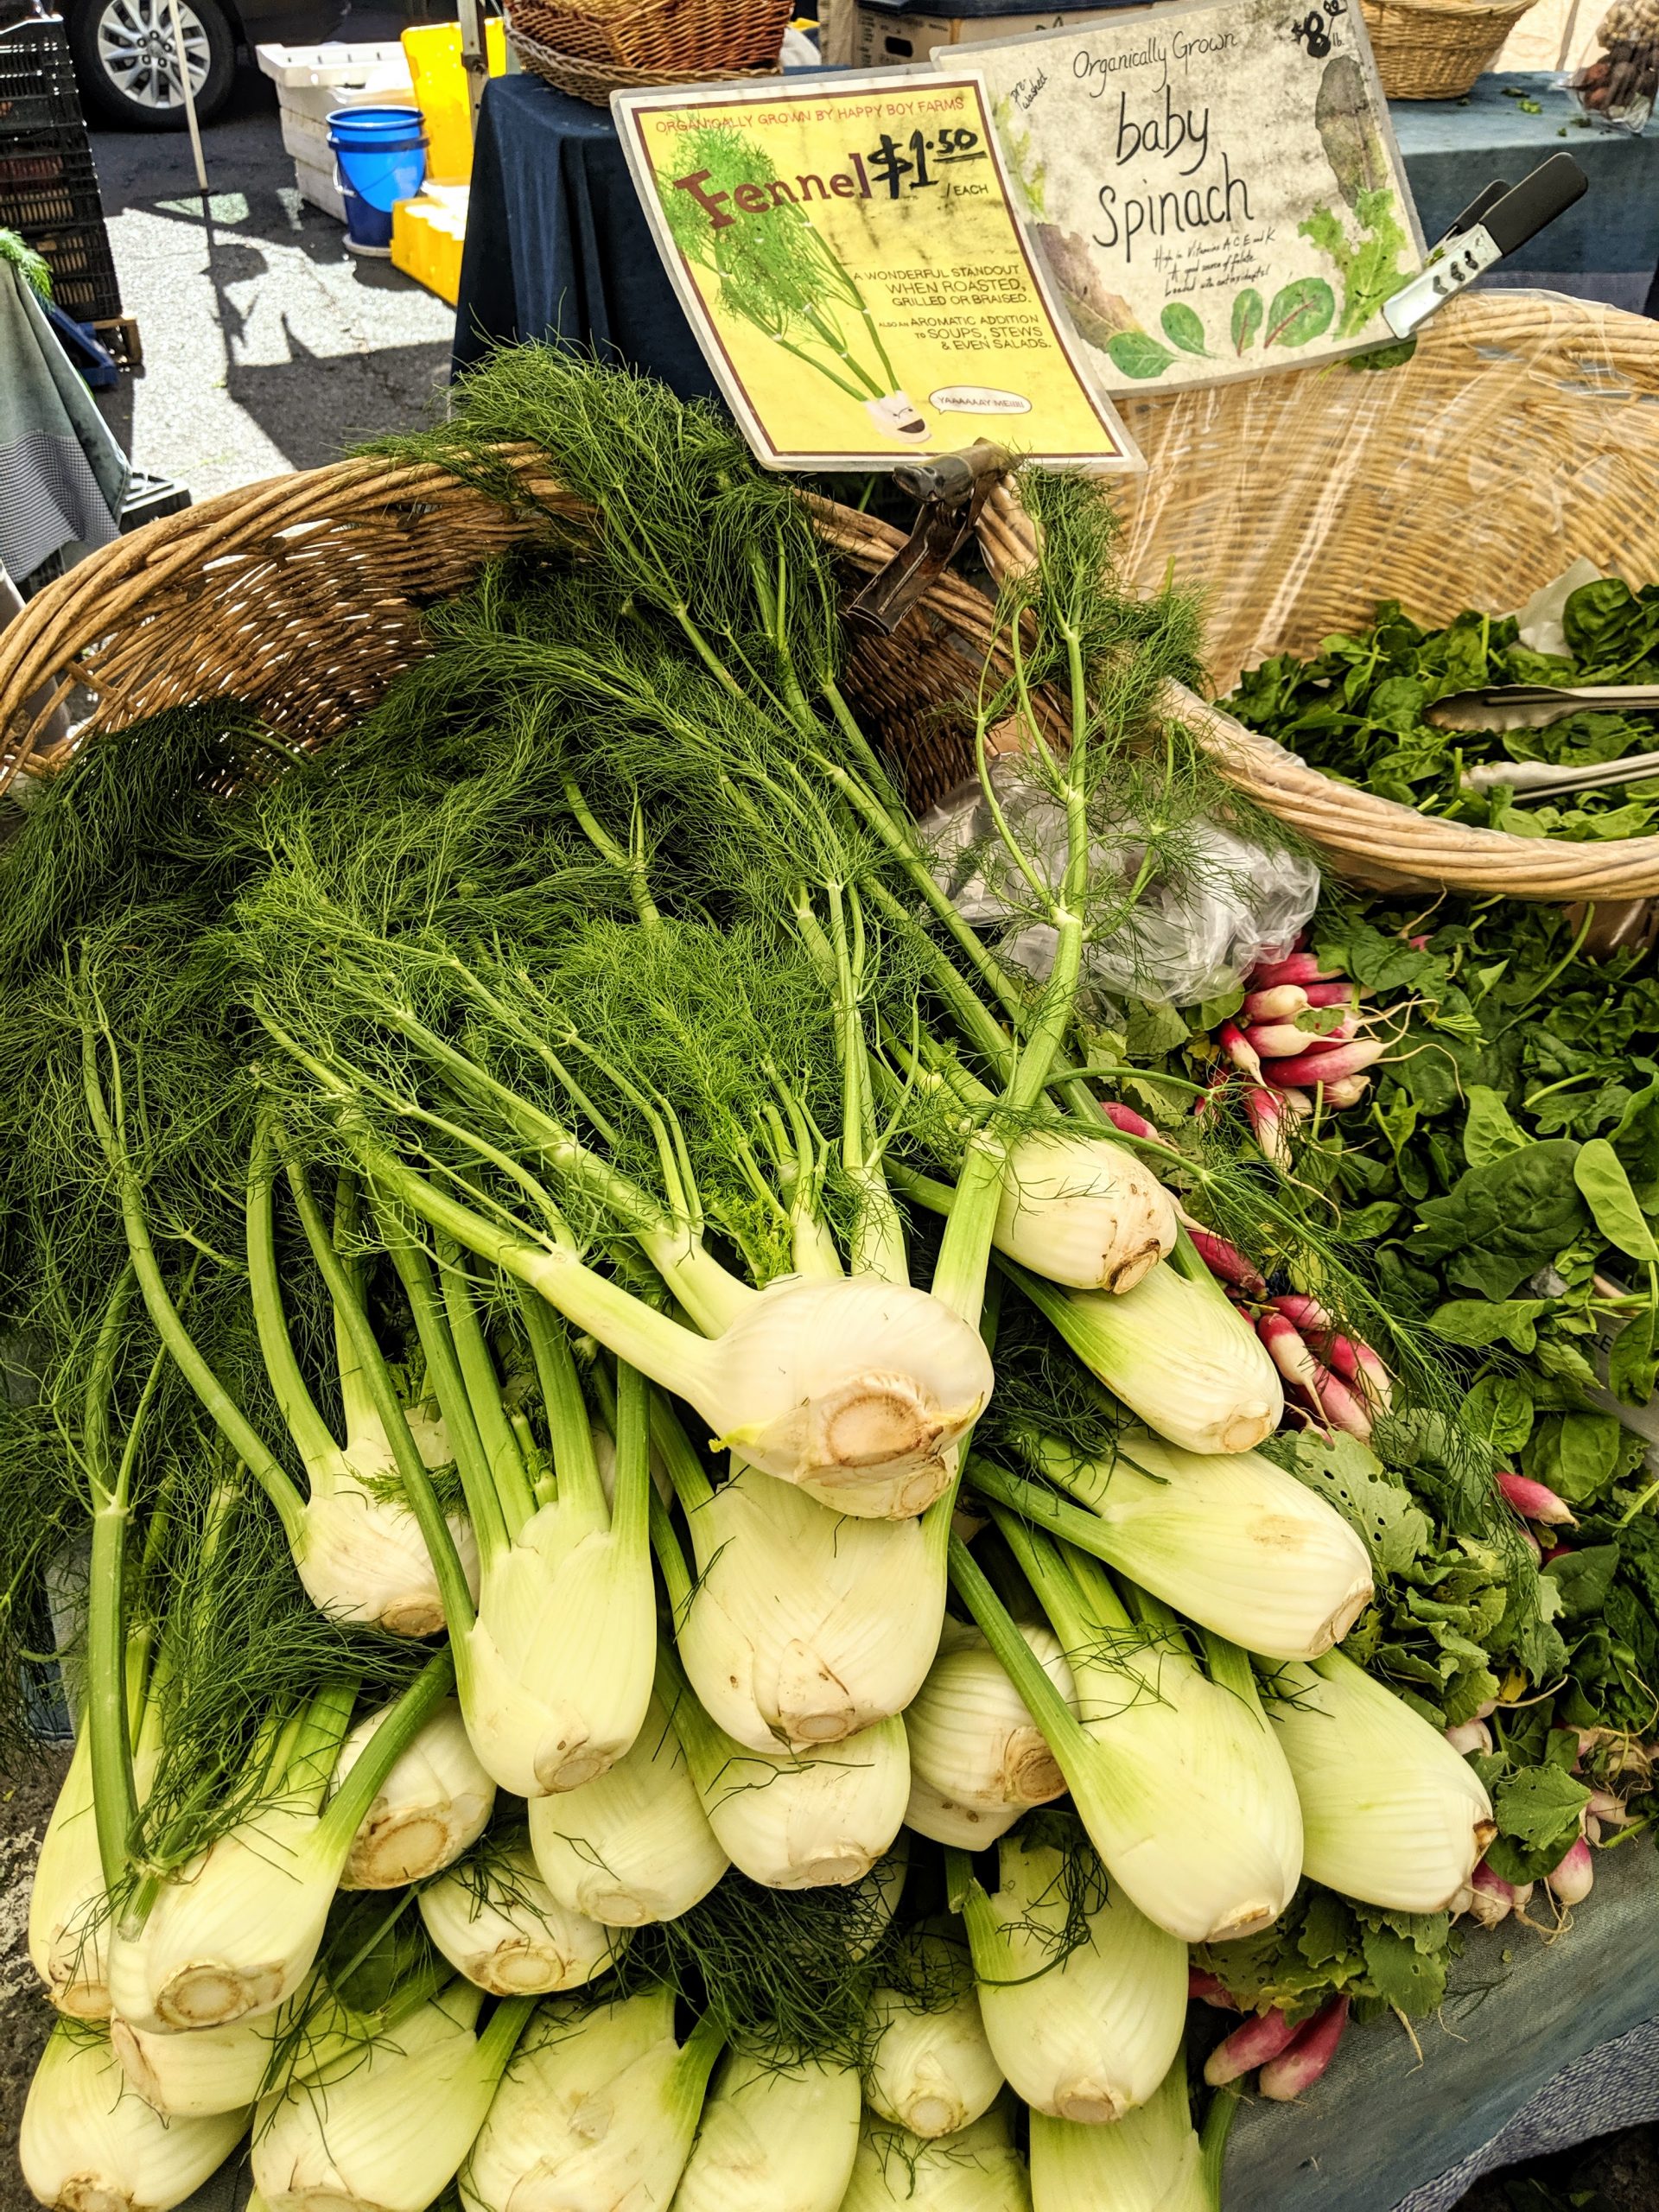 A basket full of fennel at the Farmers Market in San Francisco